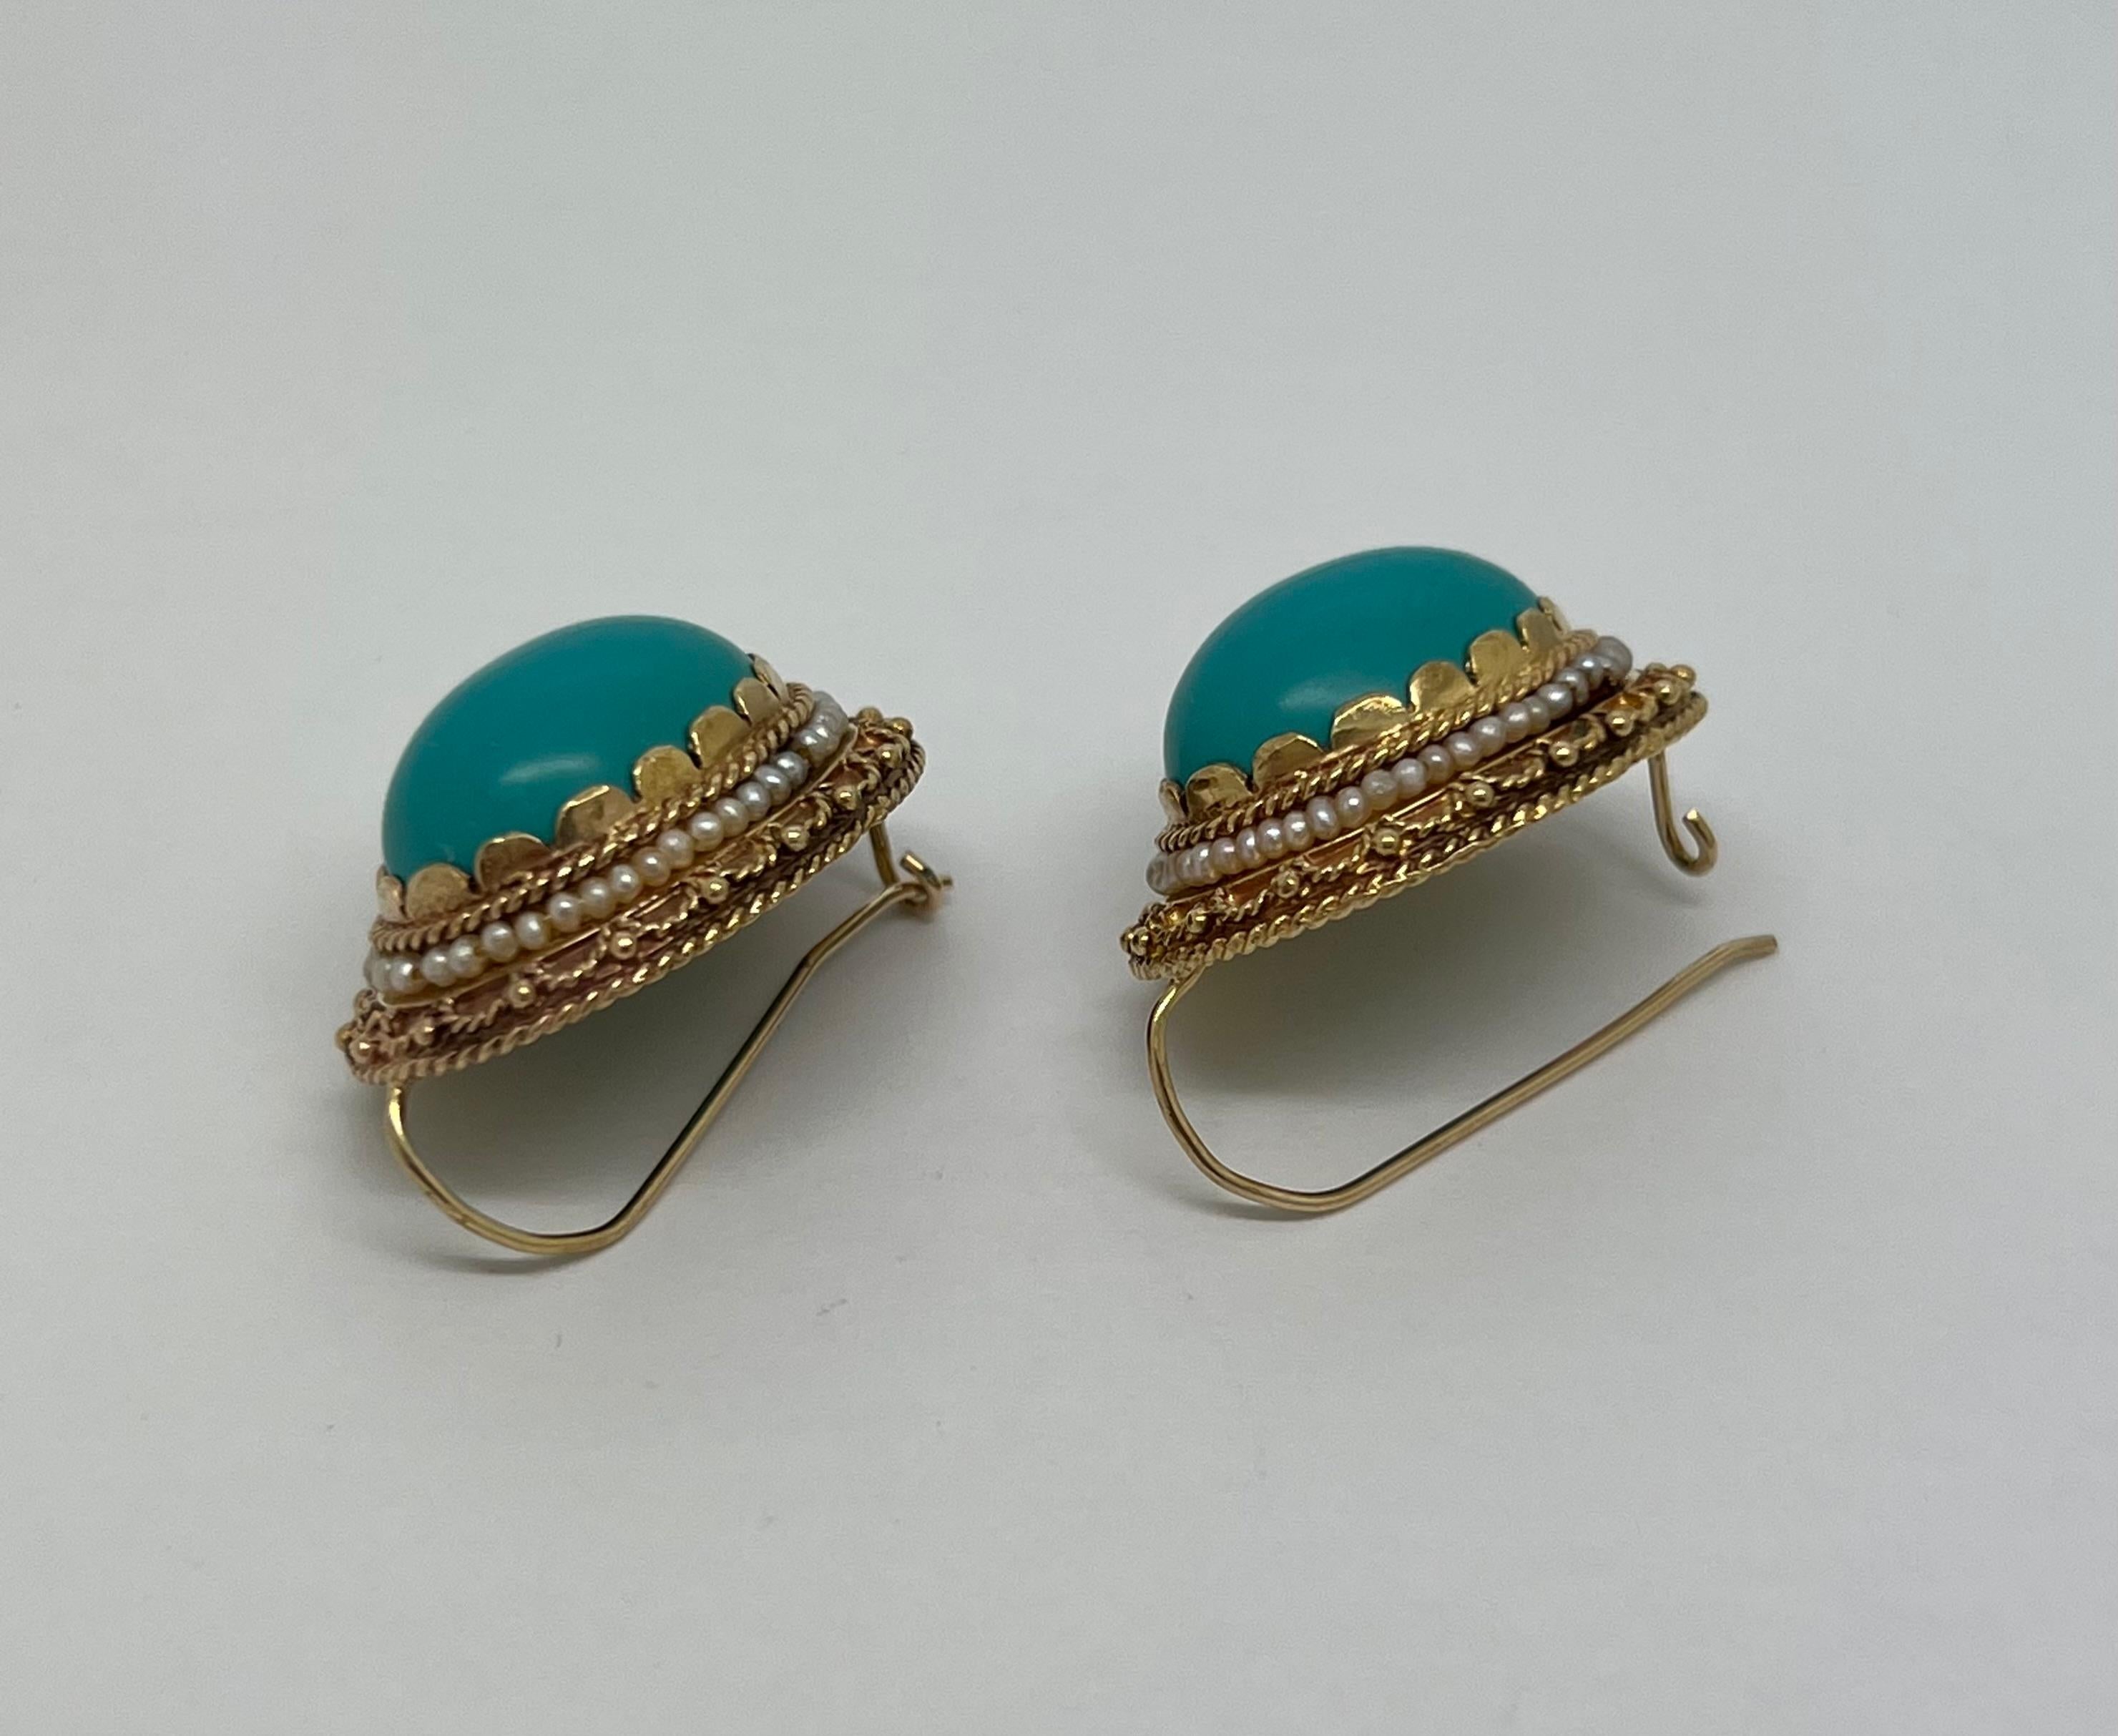 Up for sale:

These absolutely beautiful Solid 18K Yellow Gold Turquoise Drop Earrings. 
Excellent workmanship
Length: 1.05 inch
Width: 0.83 inch
Weight: 12.8
Metal: solid 18k gold
Hallmark: 18k

These earrings will be professionally cleaned and